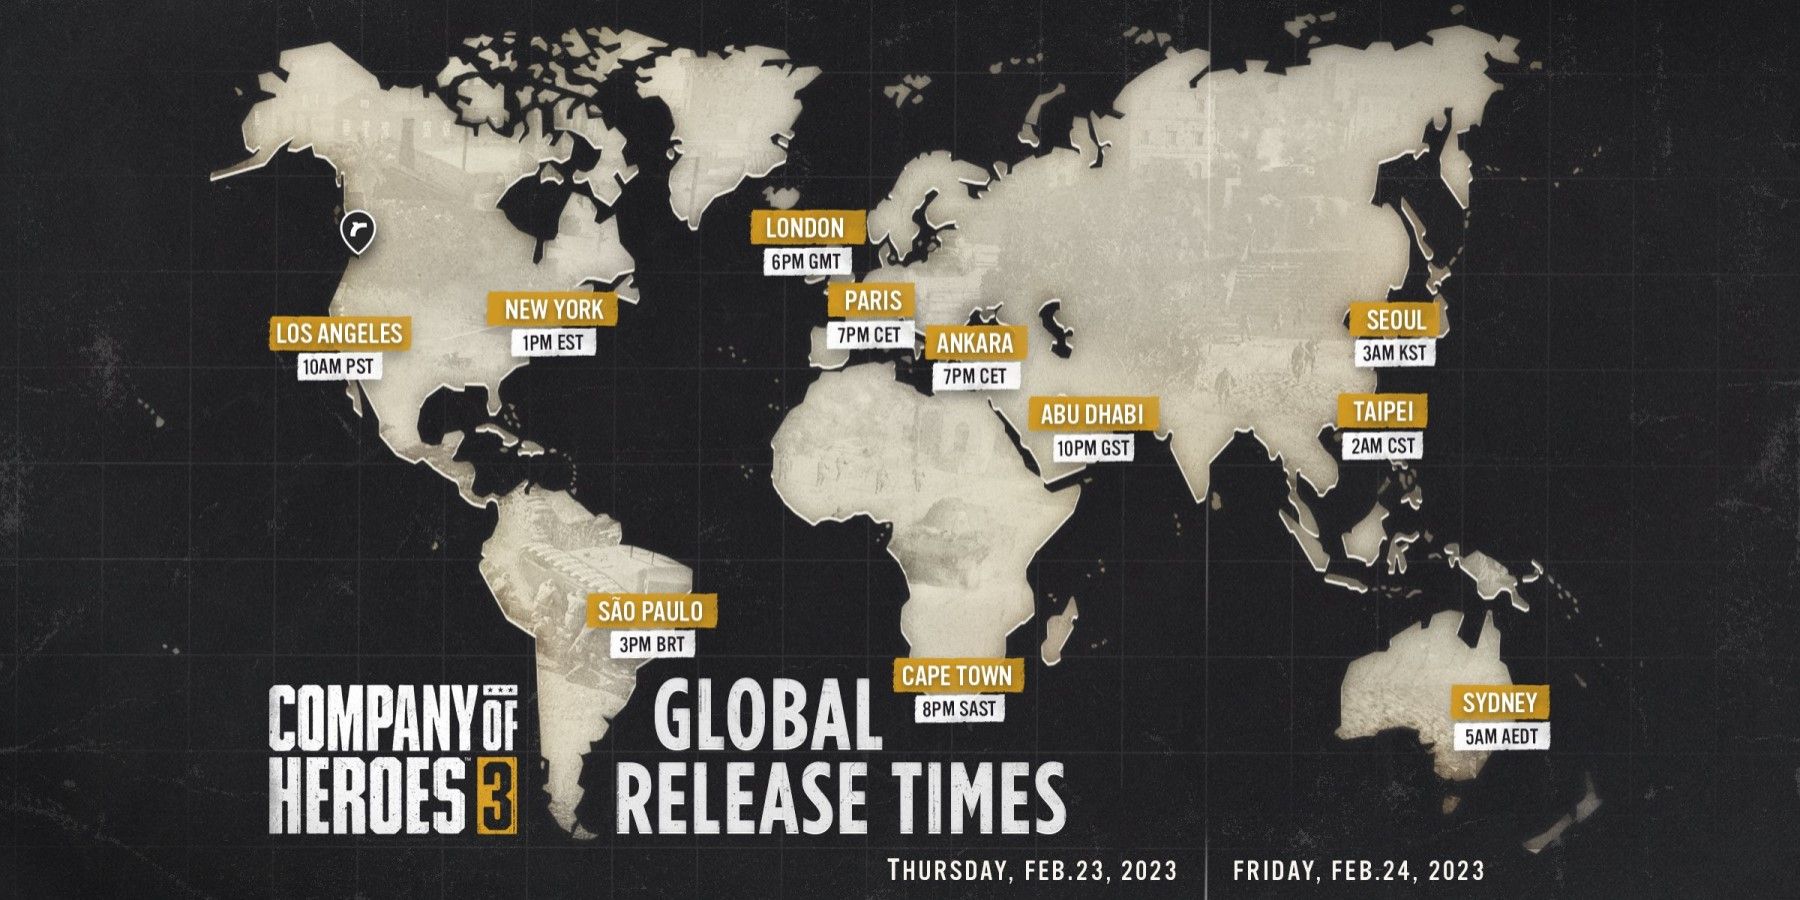 Company of Heroes 3 Release times for PC